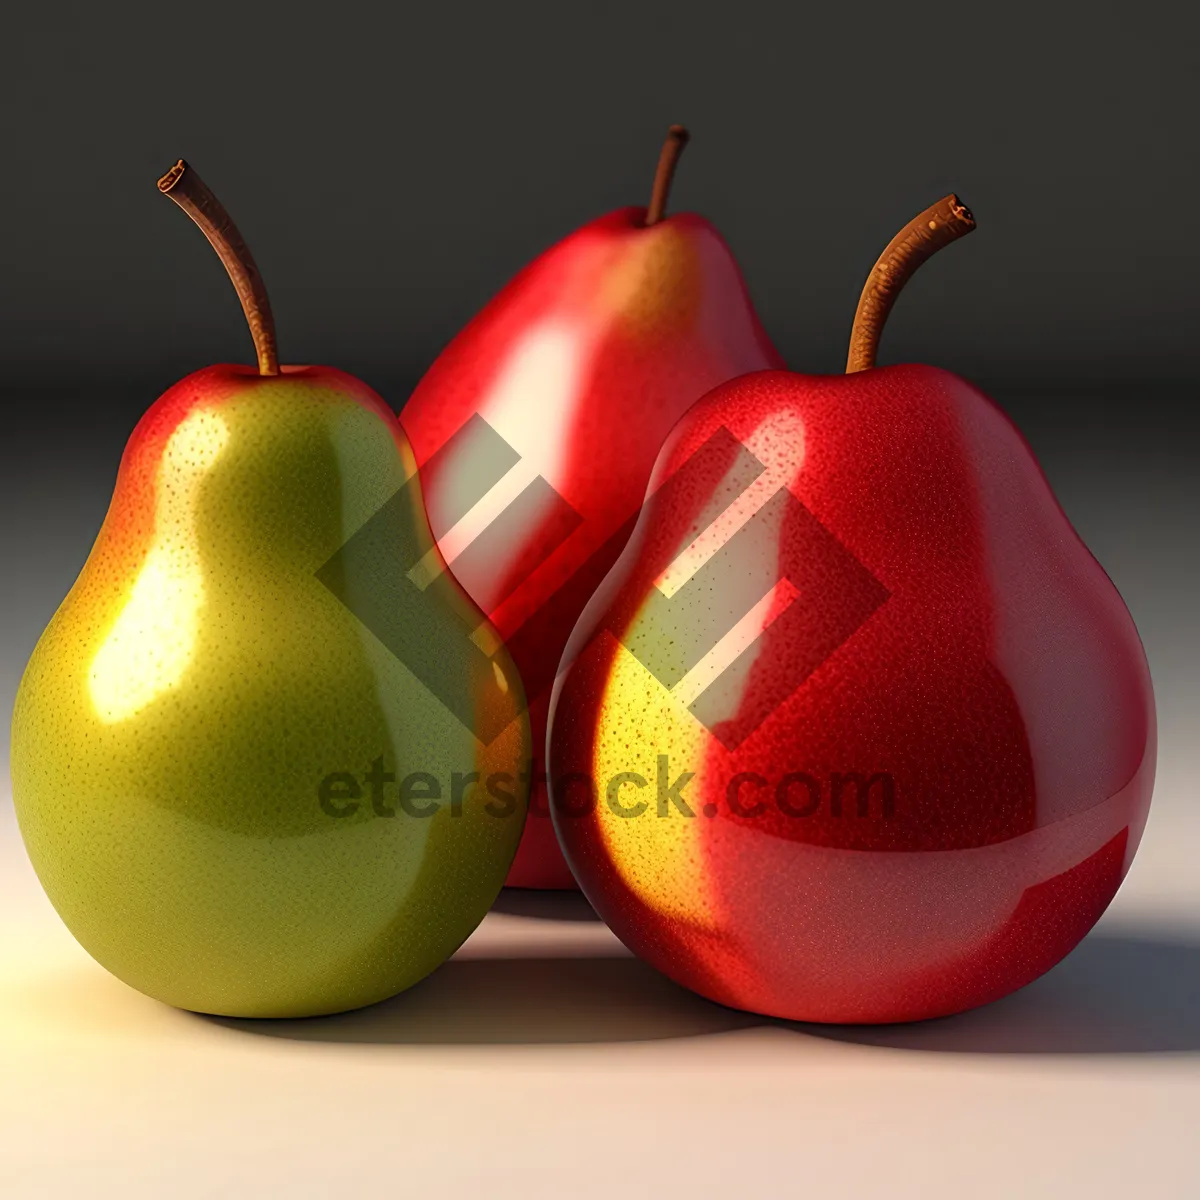 Picture of Juicy Fresh Pear - Ripe and Delicious Fruit